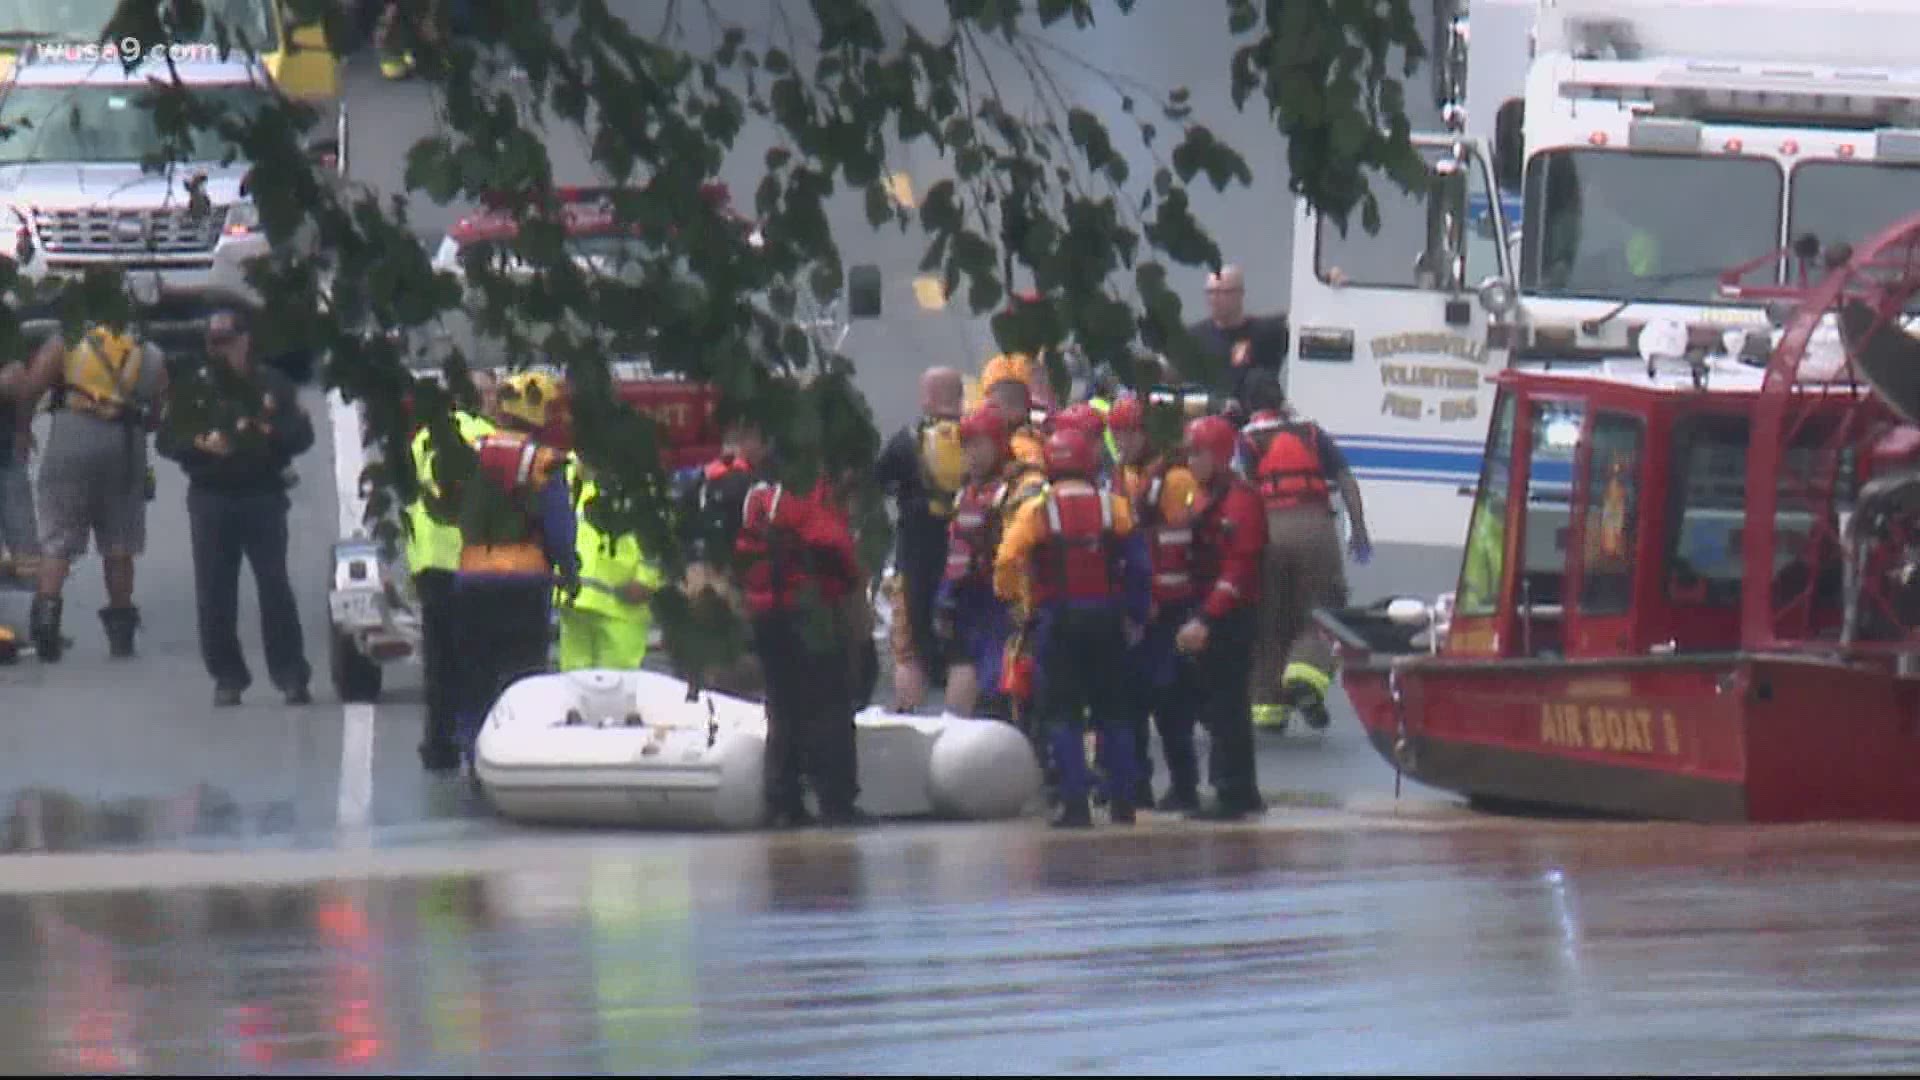 Three people rescued in Calvert County after flood waters were caused by Isaias earlier on Tuesday.